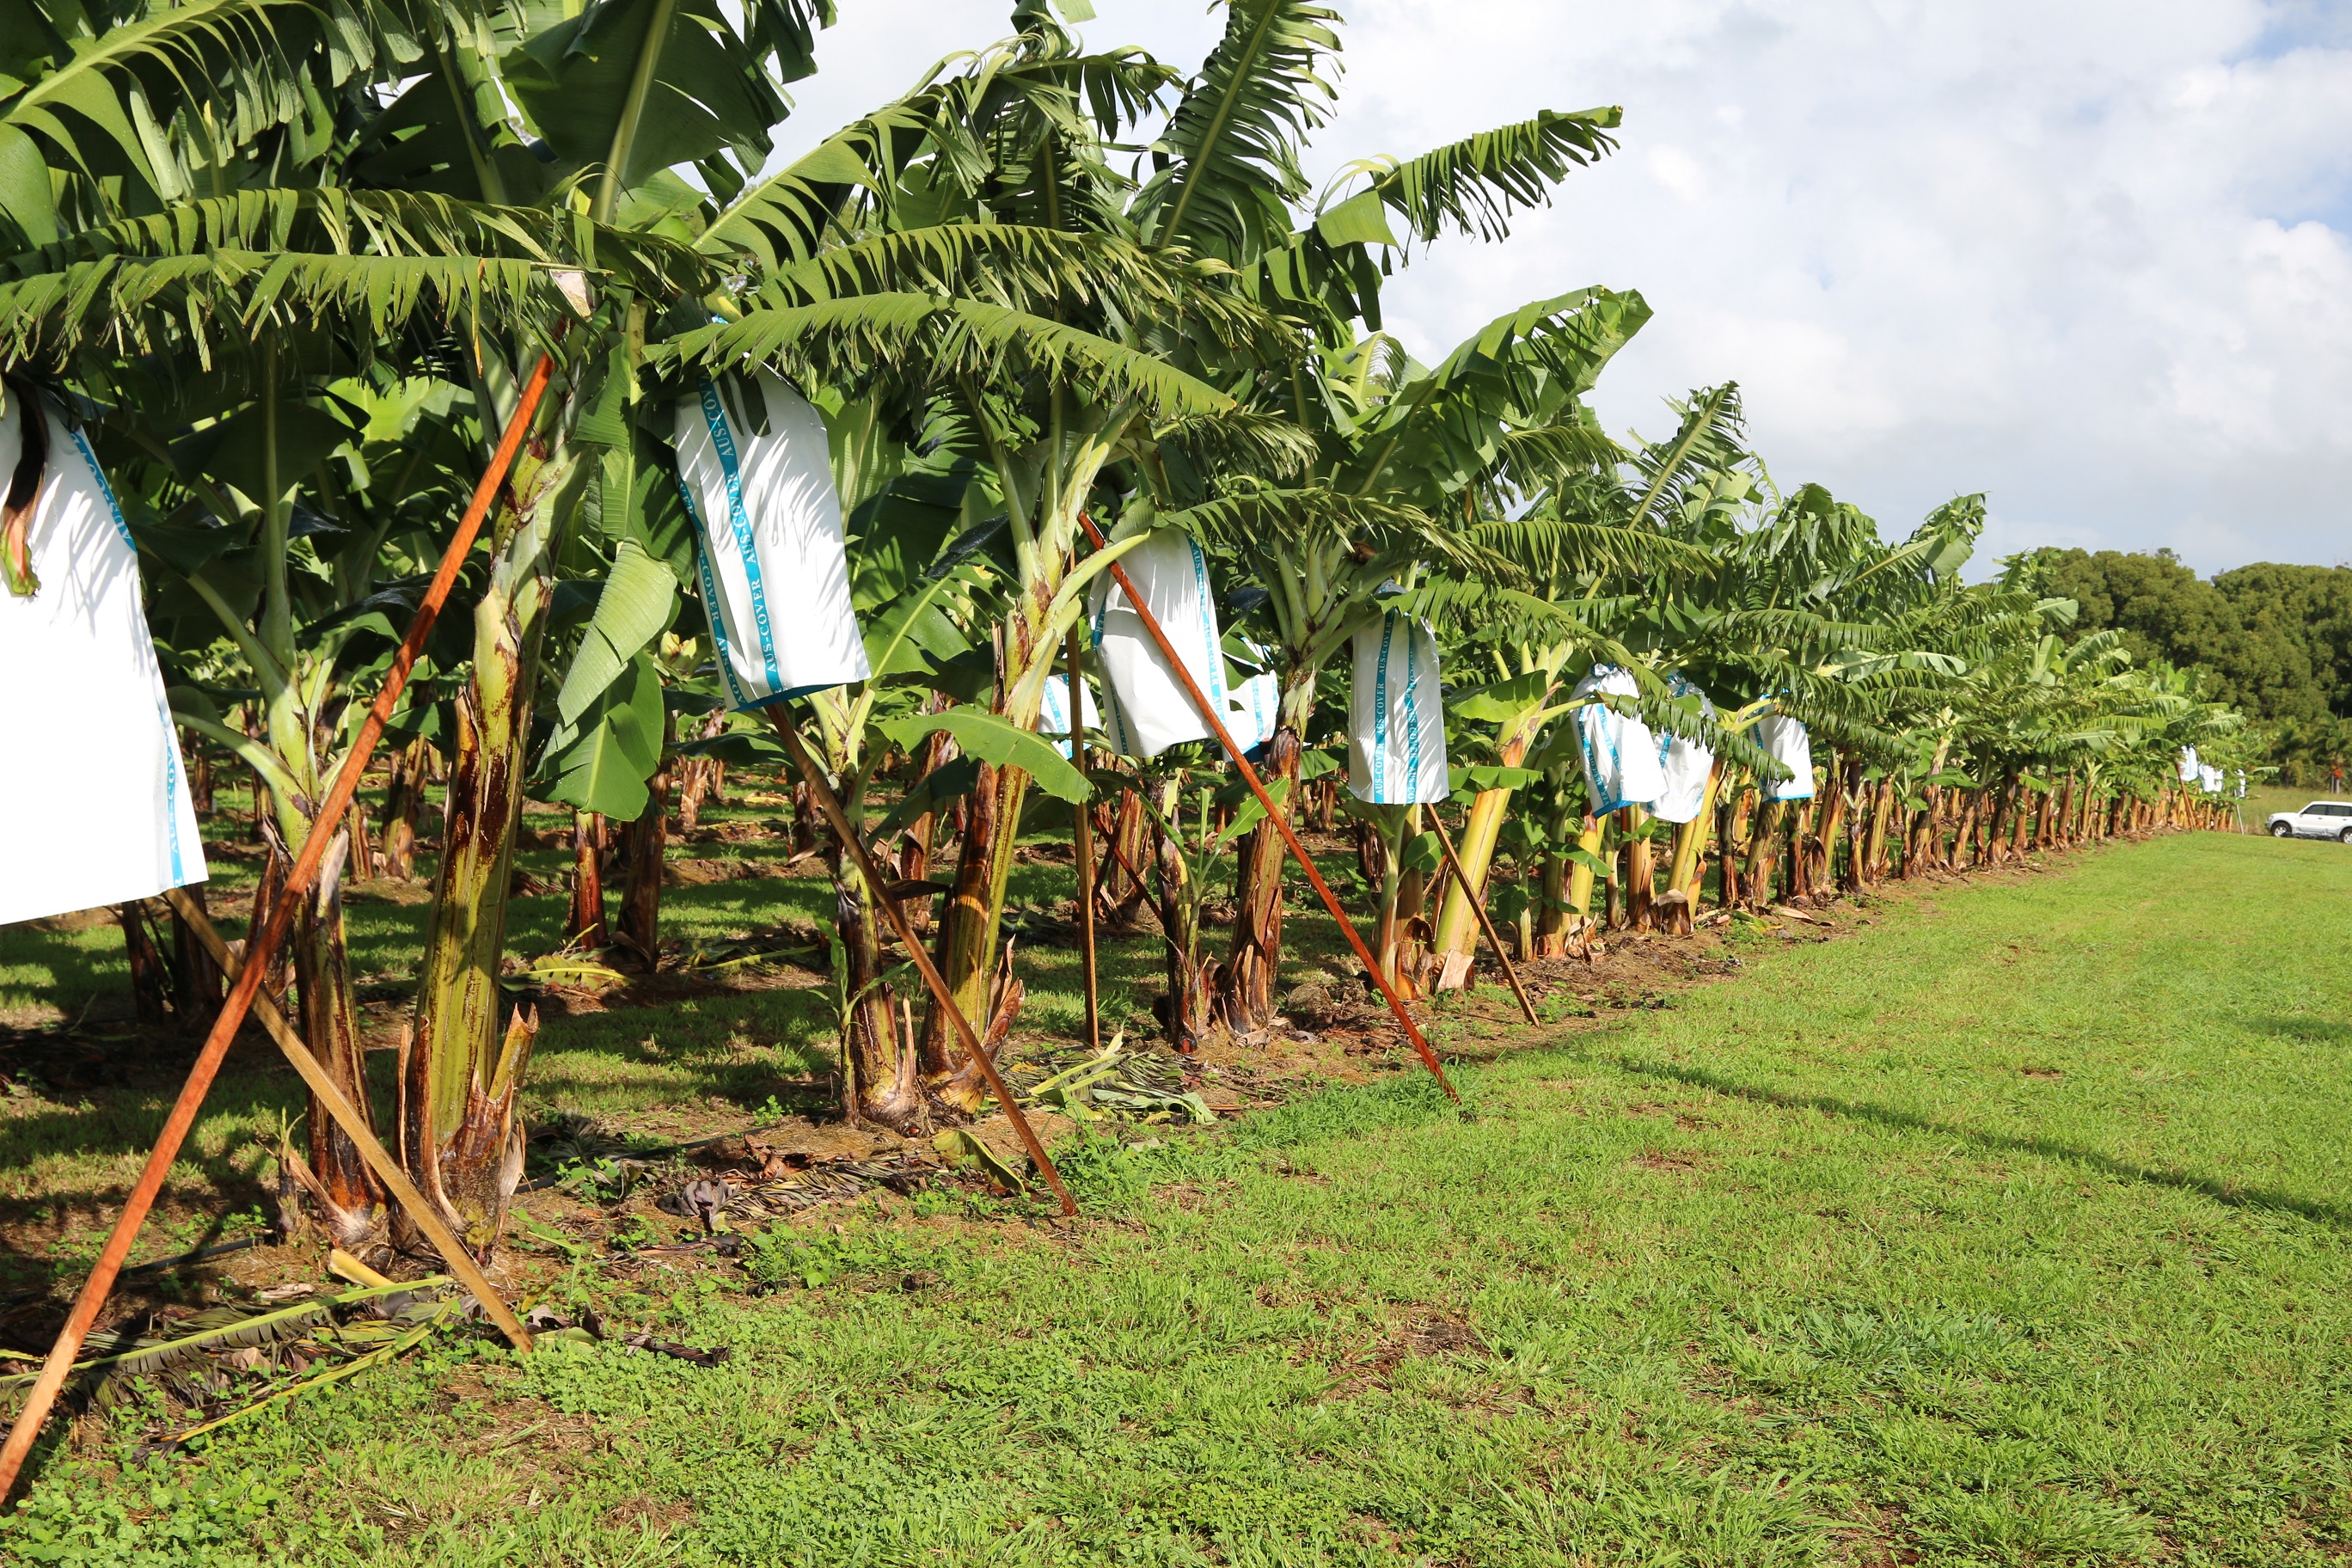 Bagged bananas at Duranbah variety trial site in the NSW Tweed Shire